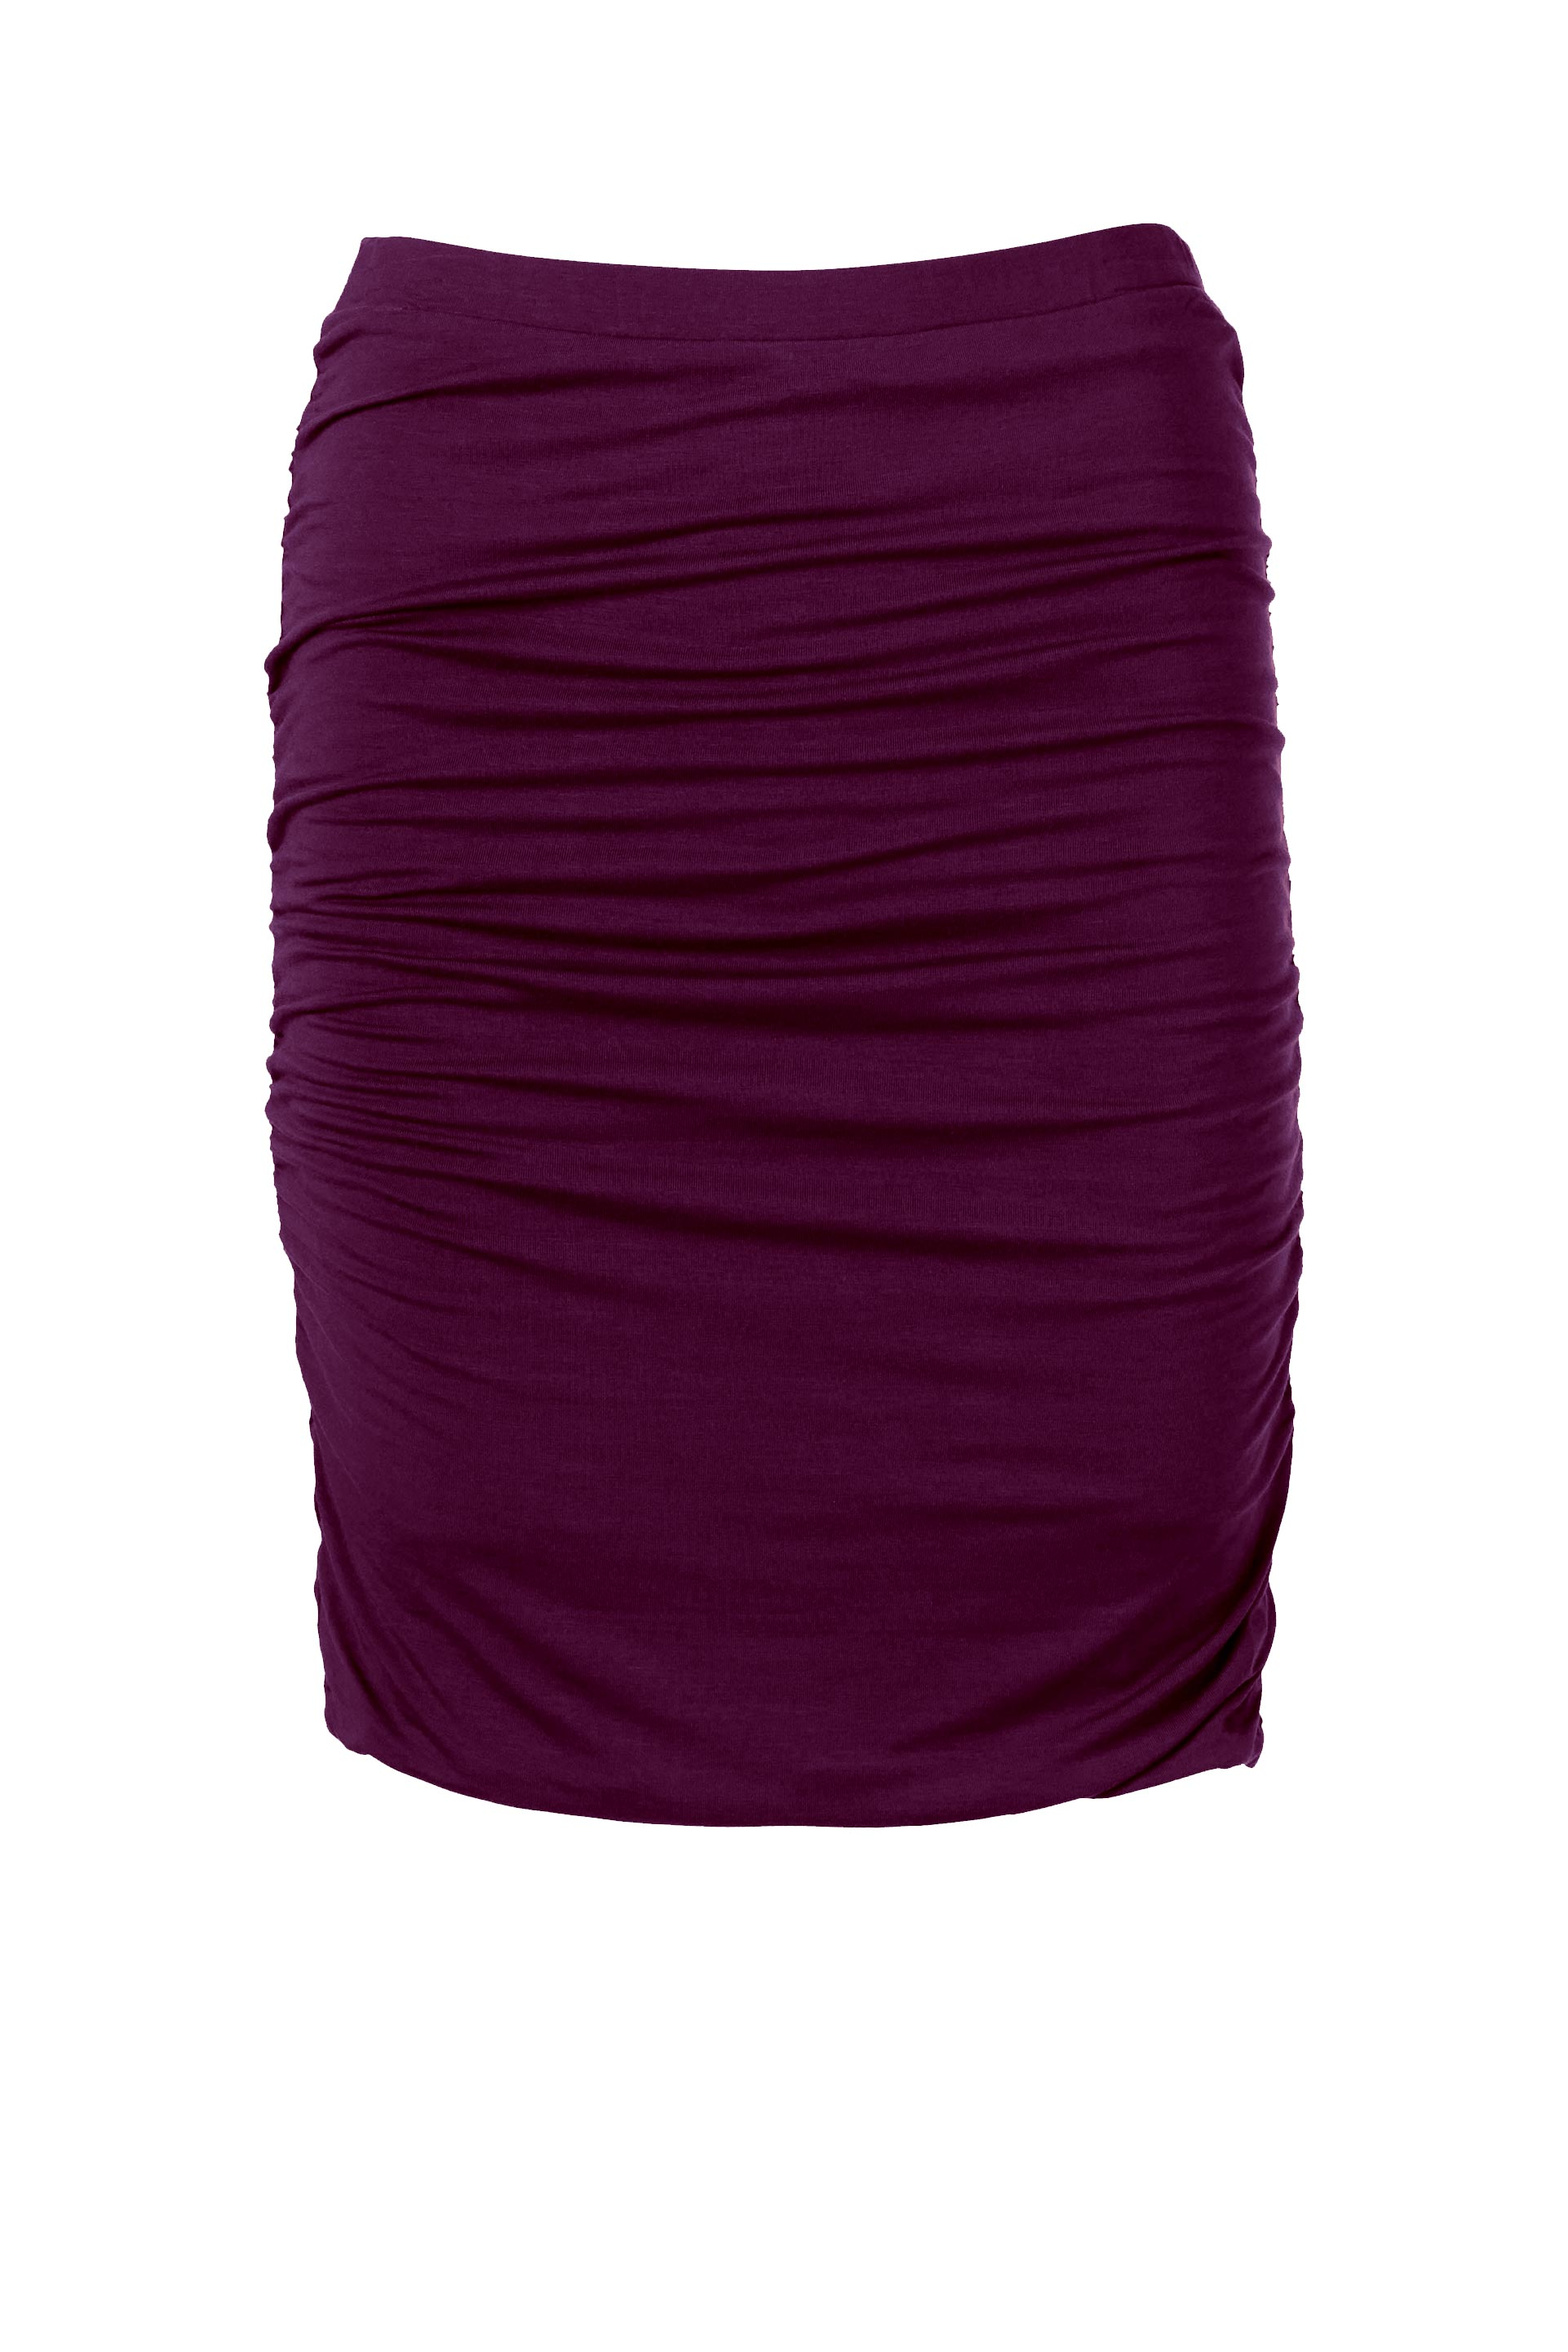 61205_ruched_skirt_cassis.jpg